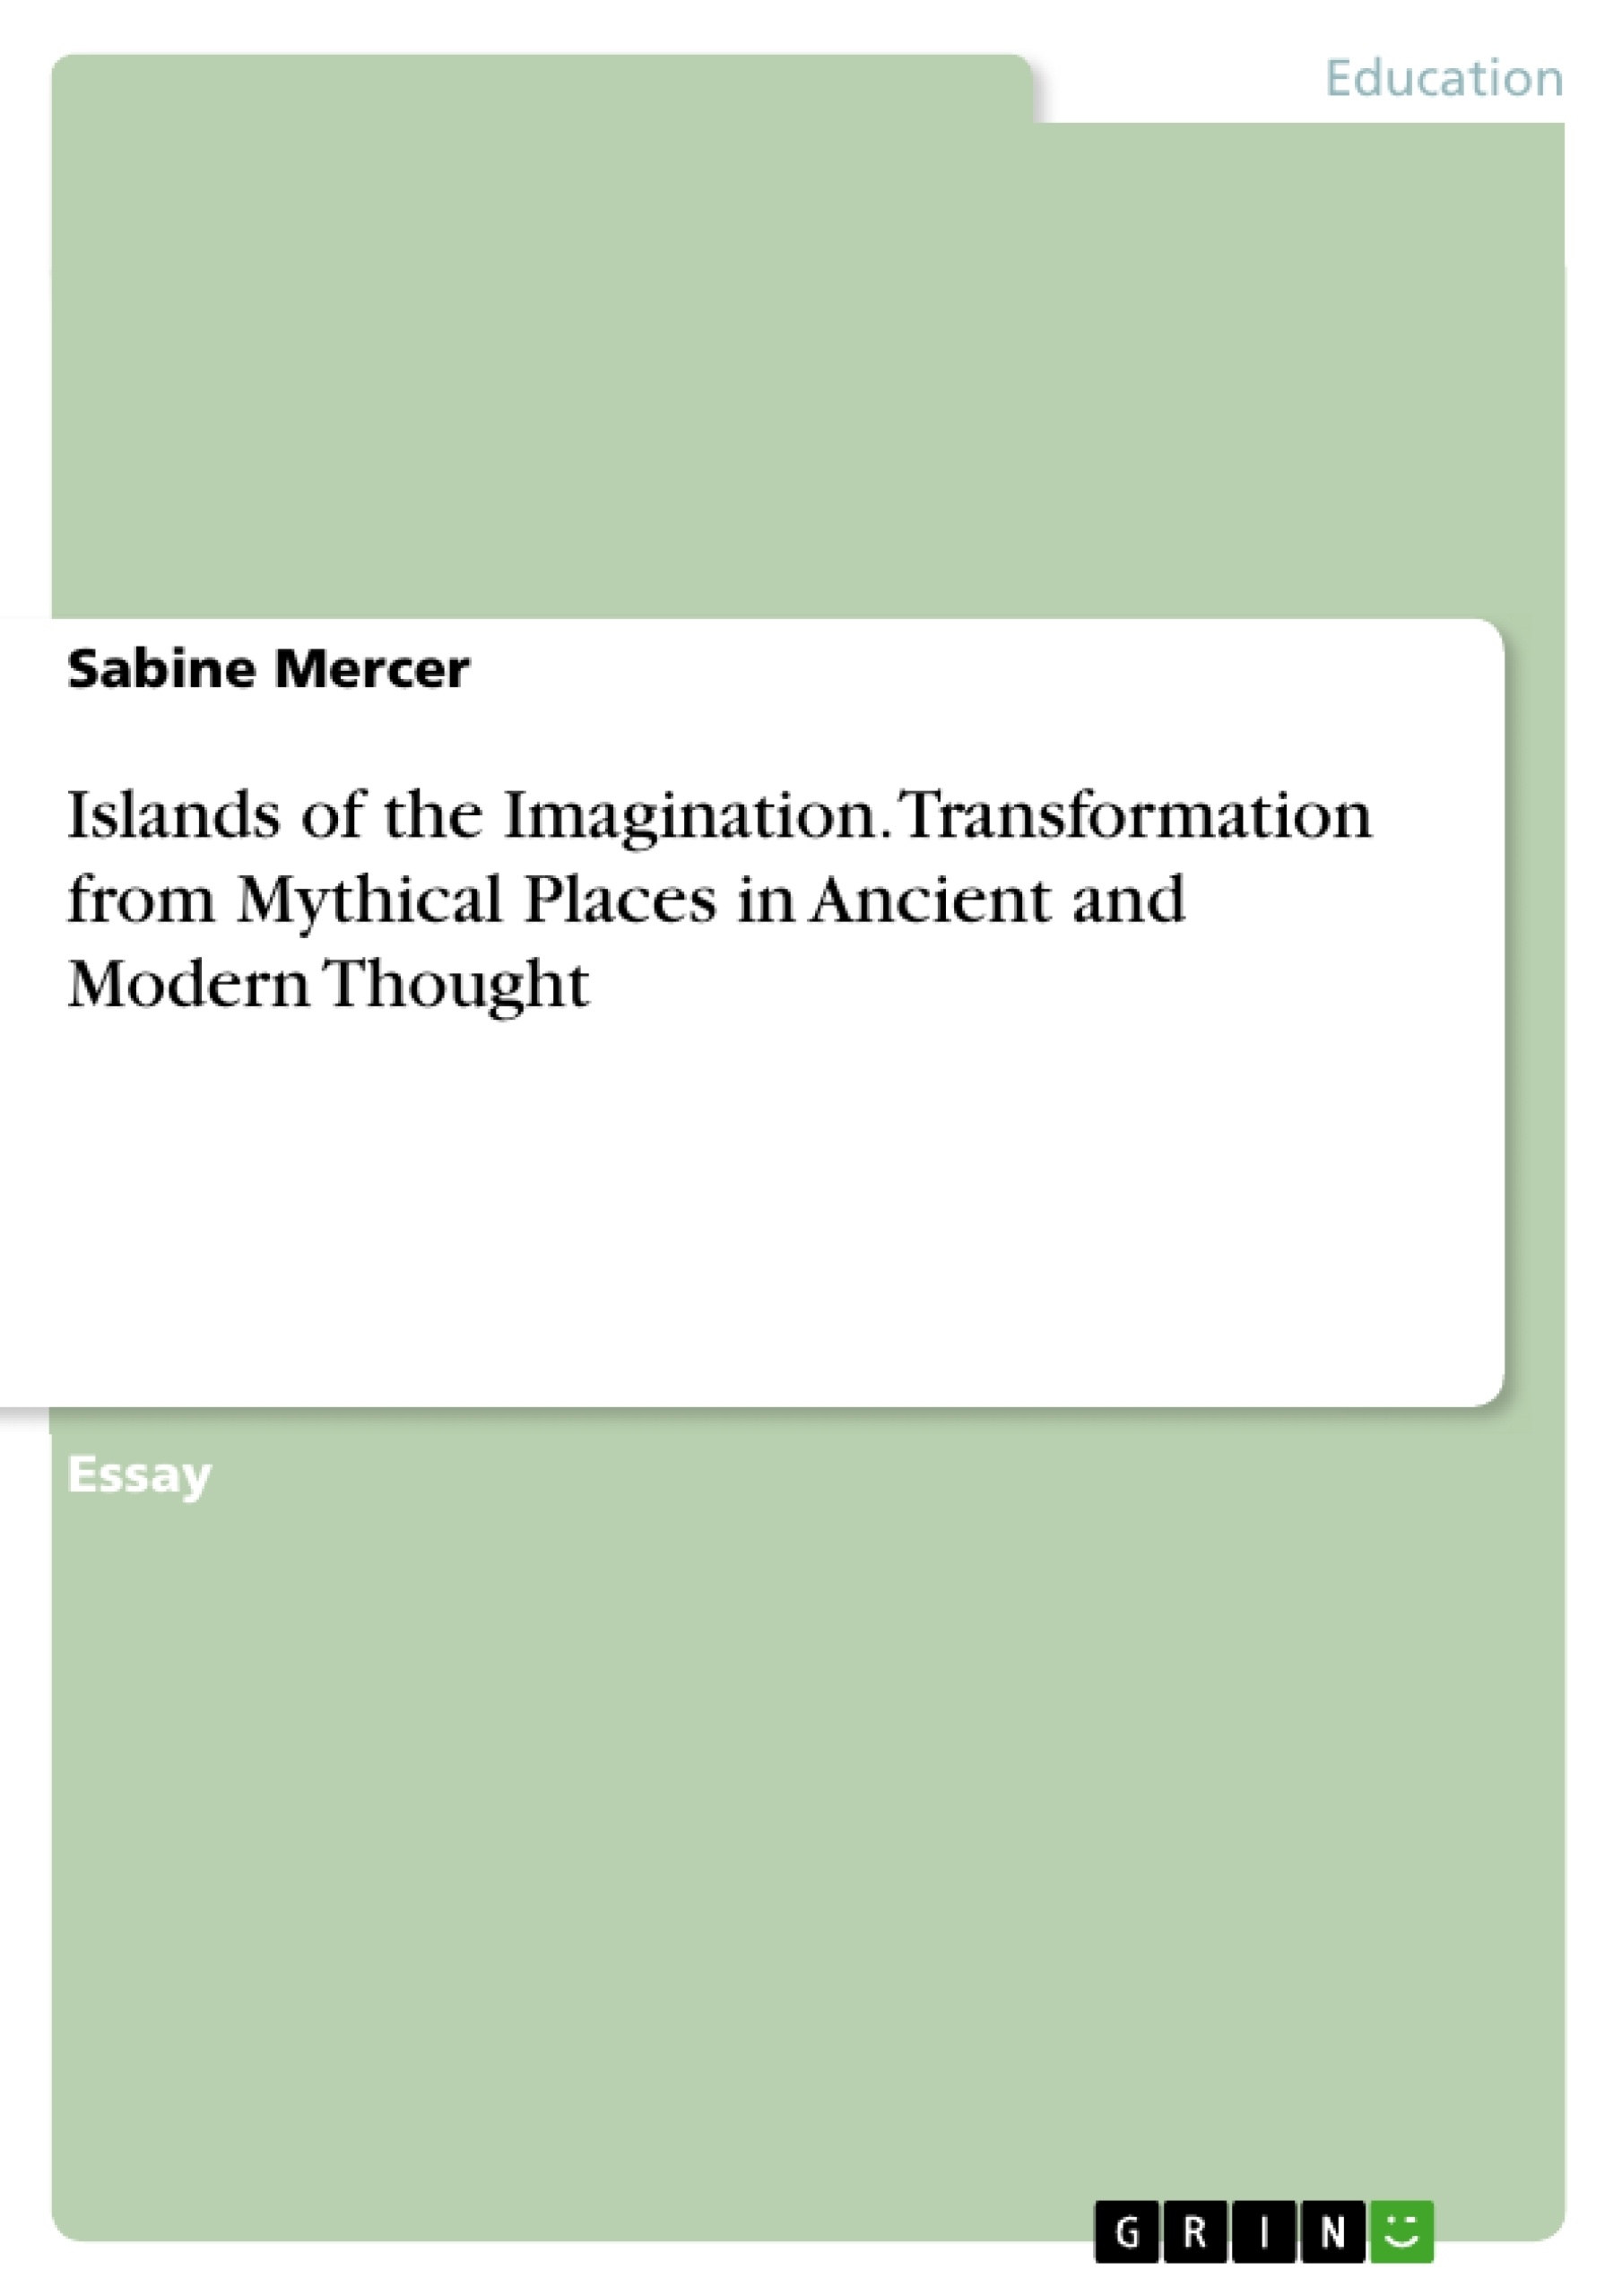 Titel: Islands of the Imagination. Transformation from Mythical Places in Ancient and Modern Thought